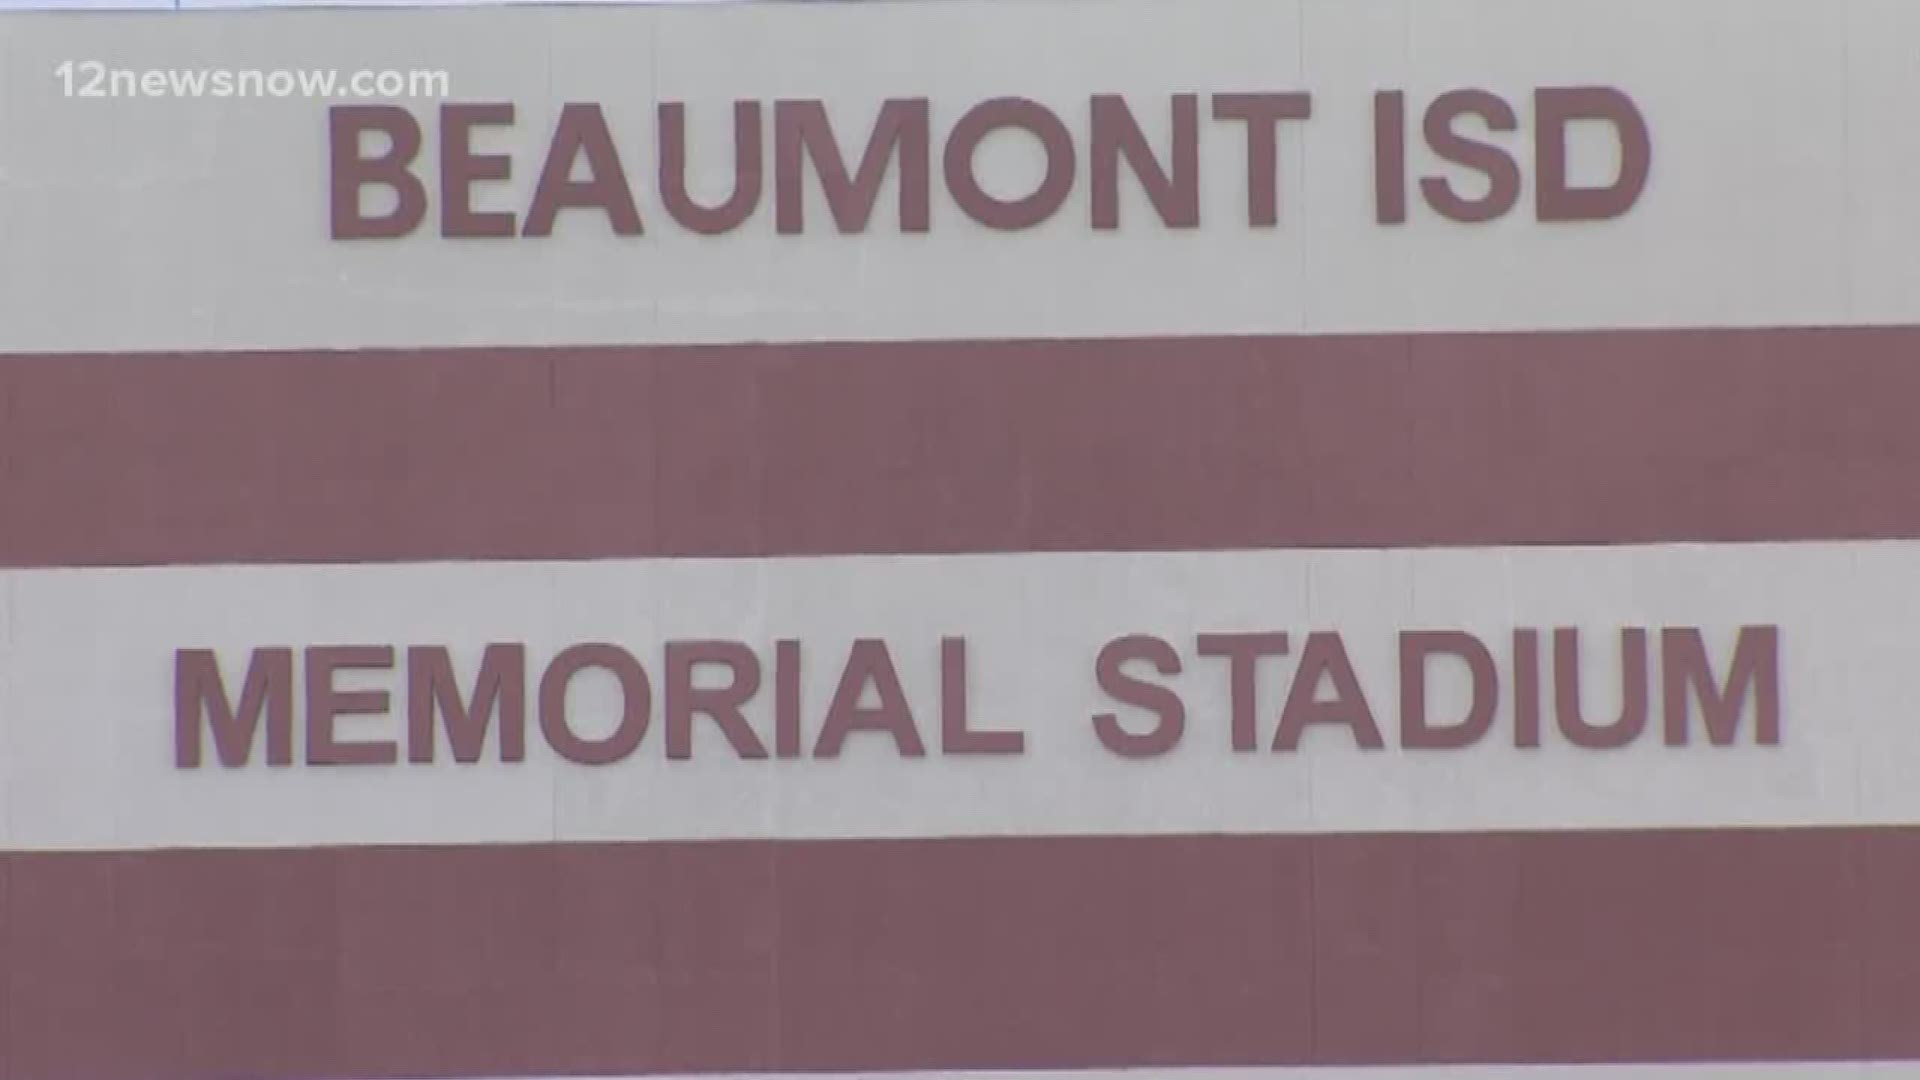 The signage at the recently renamed Beaumont ISD stadium have been changed to reflect the new name, Beaumont ISD Memorial Stadium.